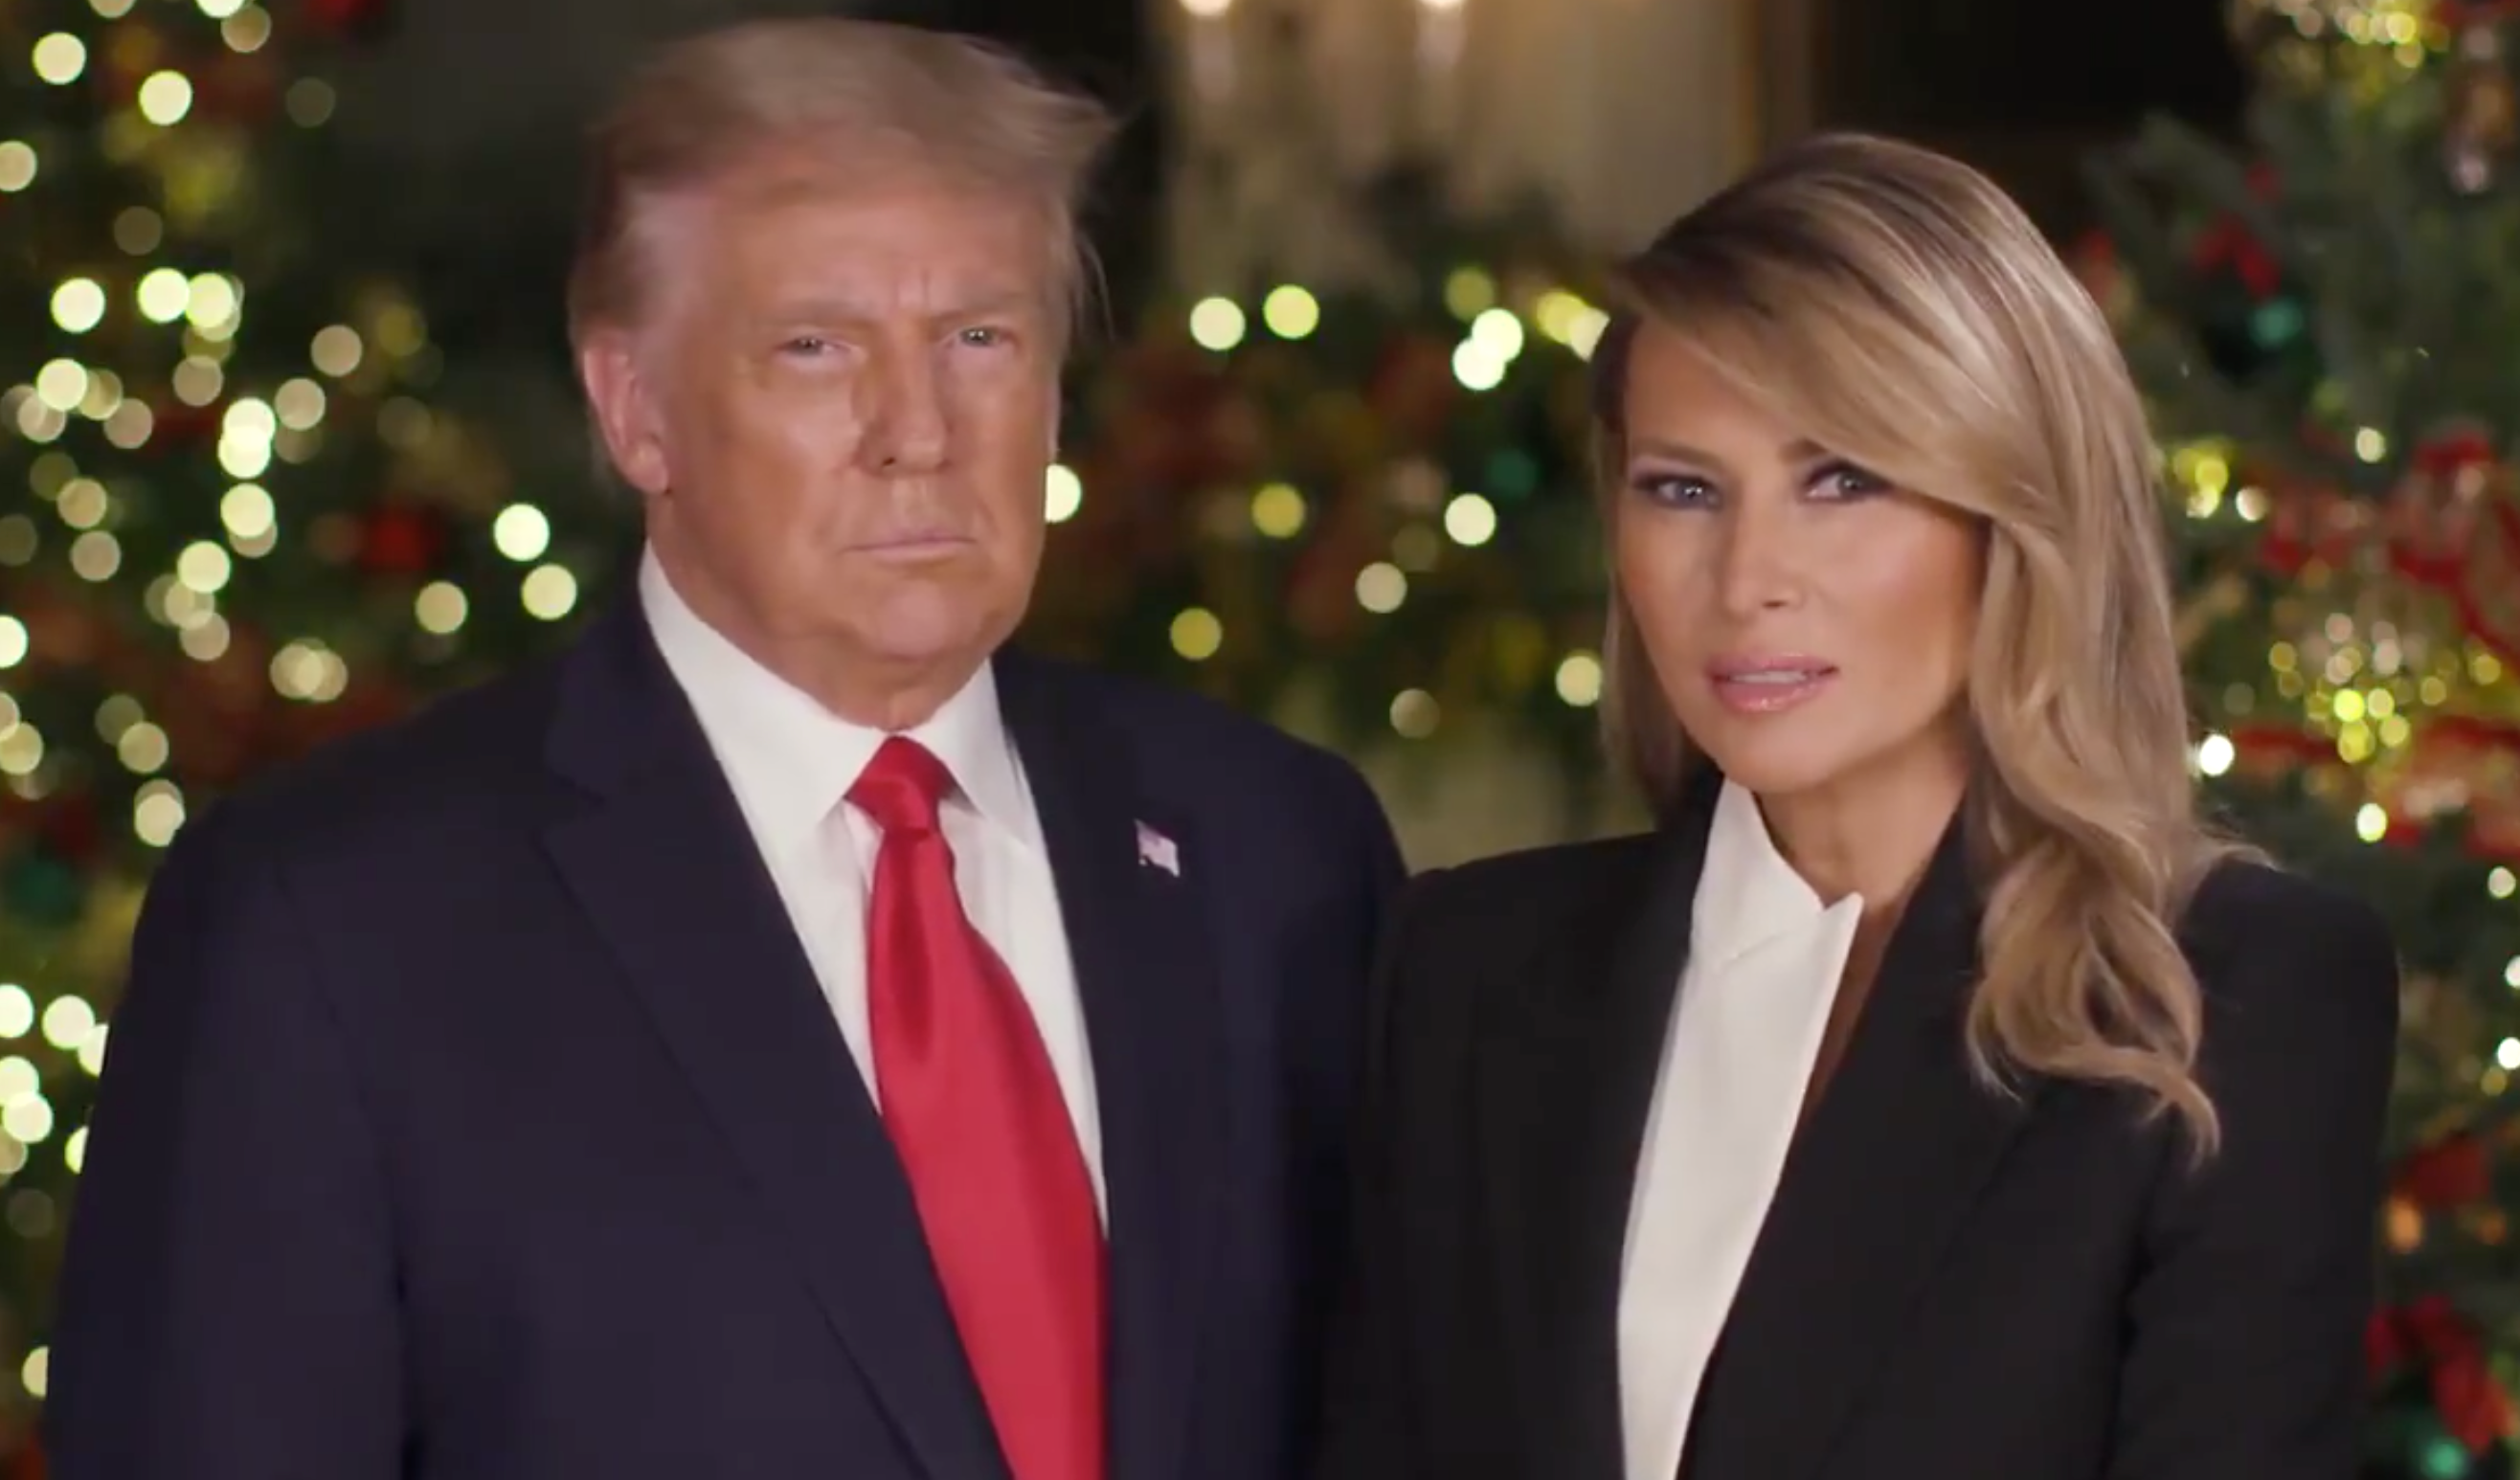 Trump news live: Latest updates and tweets as president and Melania share Christmas message